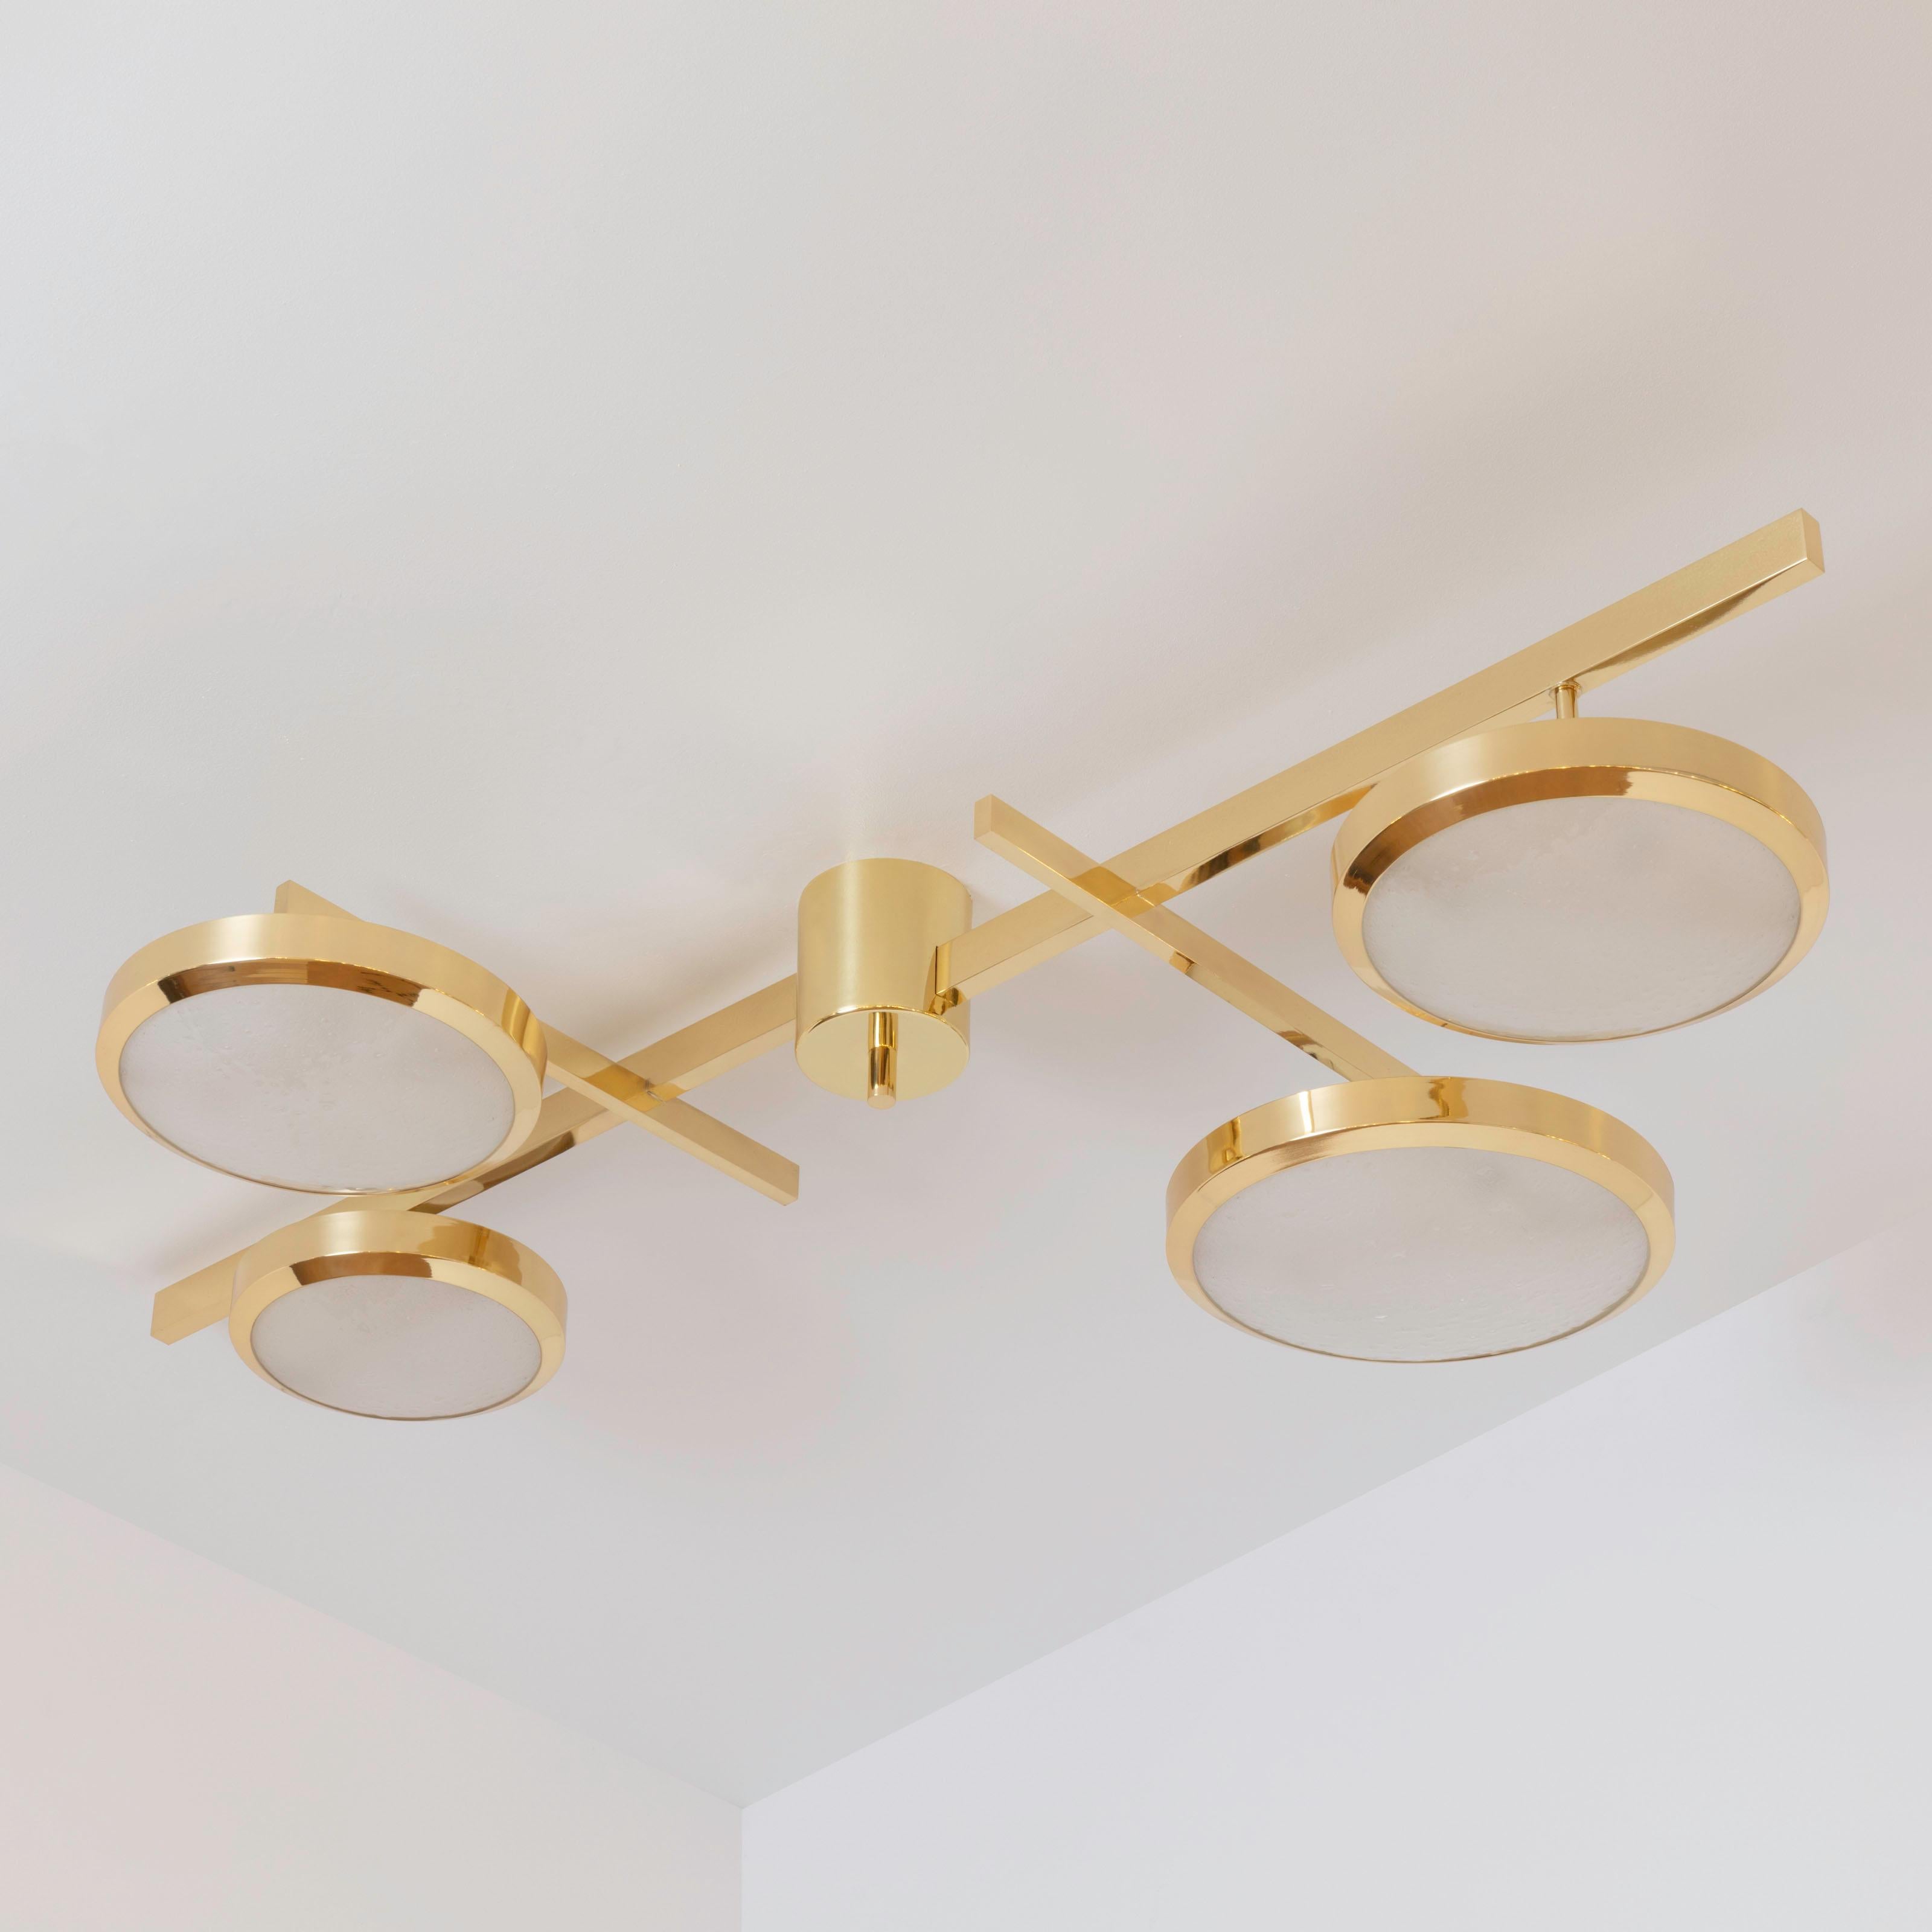 Mid-Century Modern Tetrix Ceiling Light by Gaspare Asaro - Polished Brass Finish For Sale